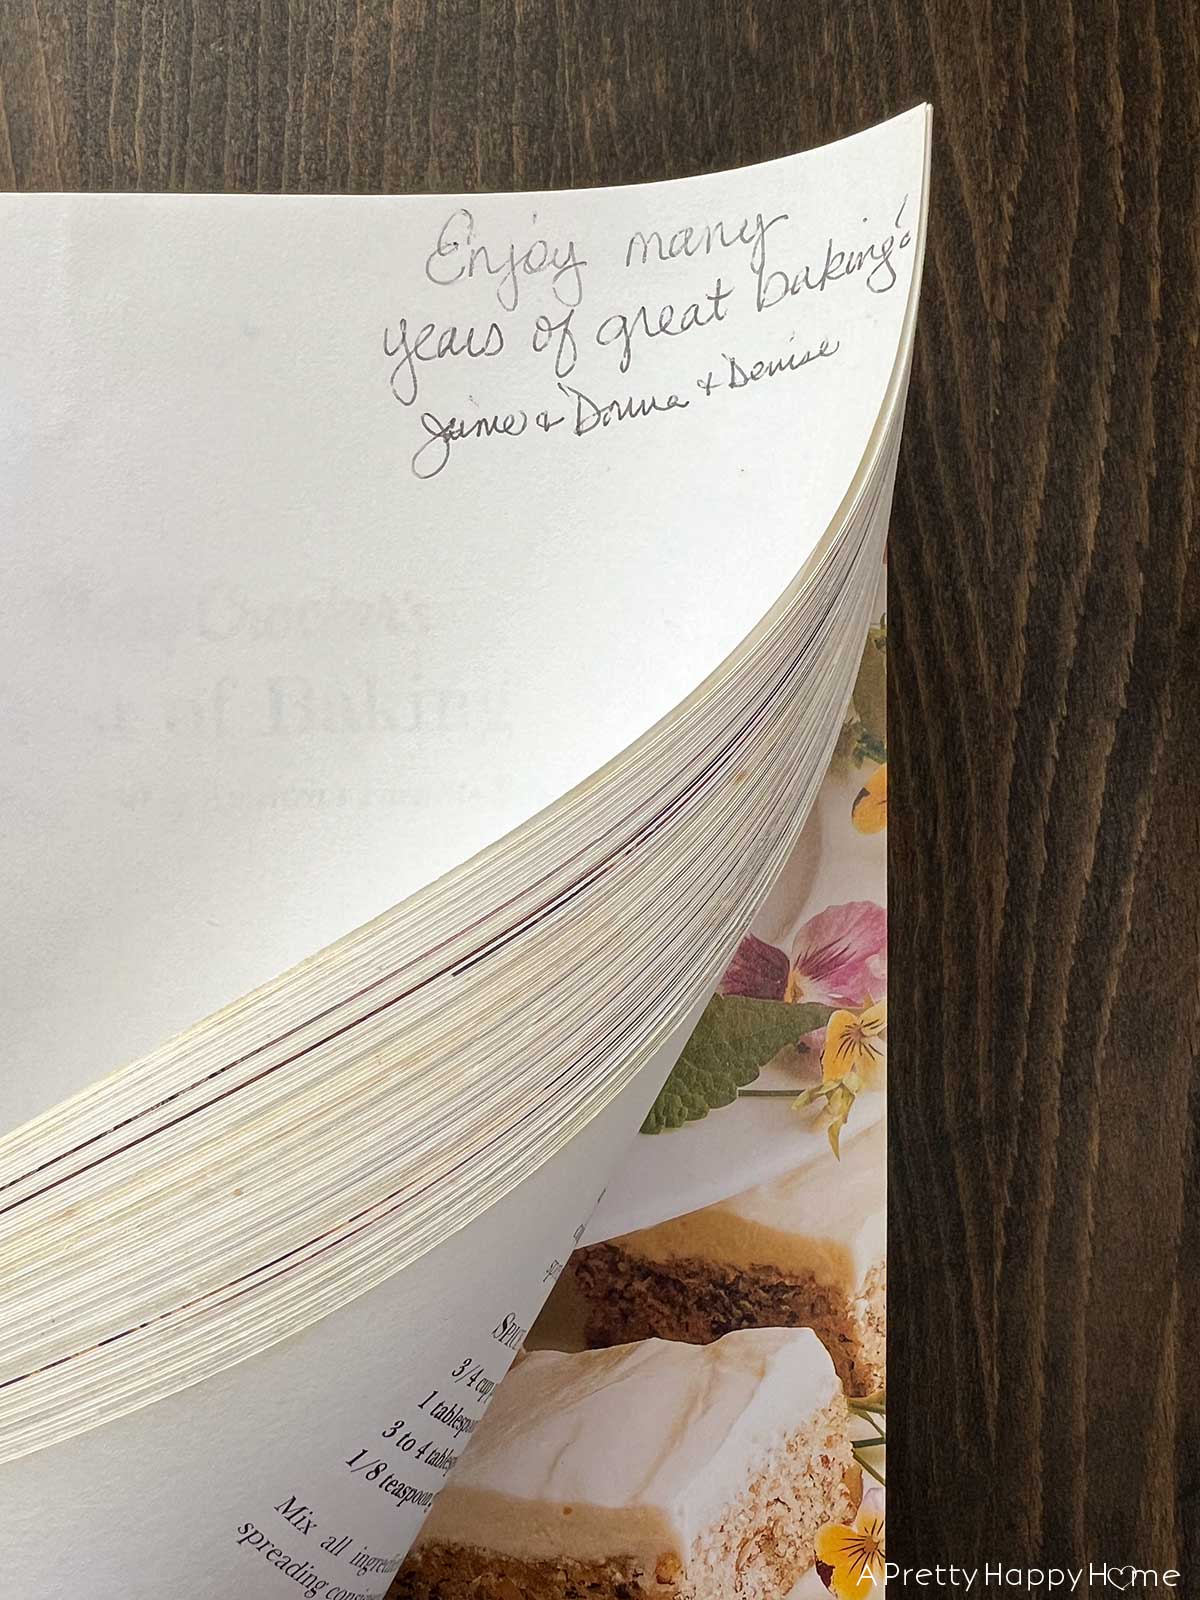 10 Wedding Gifts We Still Use 25 Years Later cookbook wedding gifts you actually use